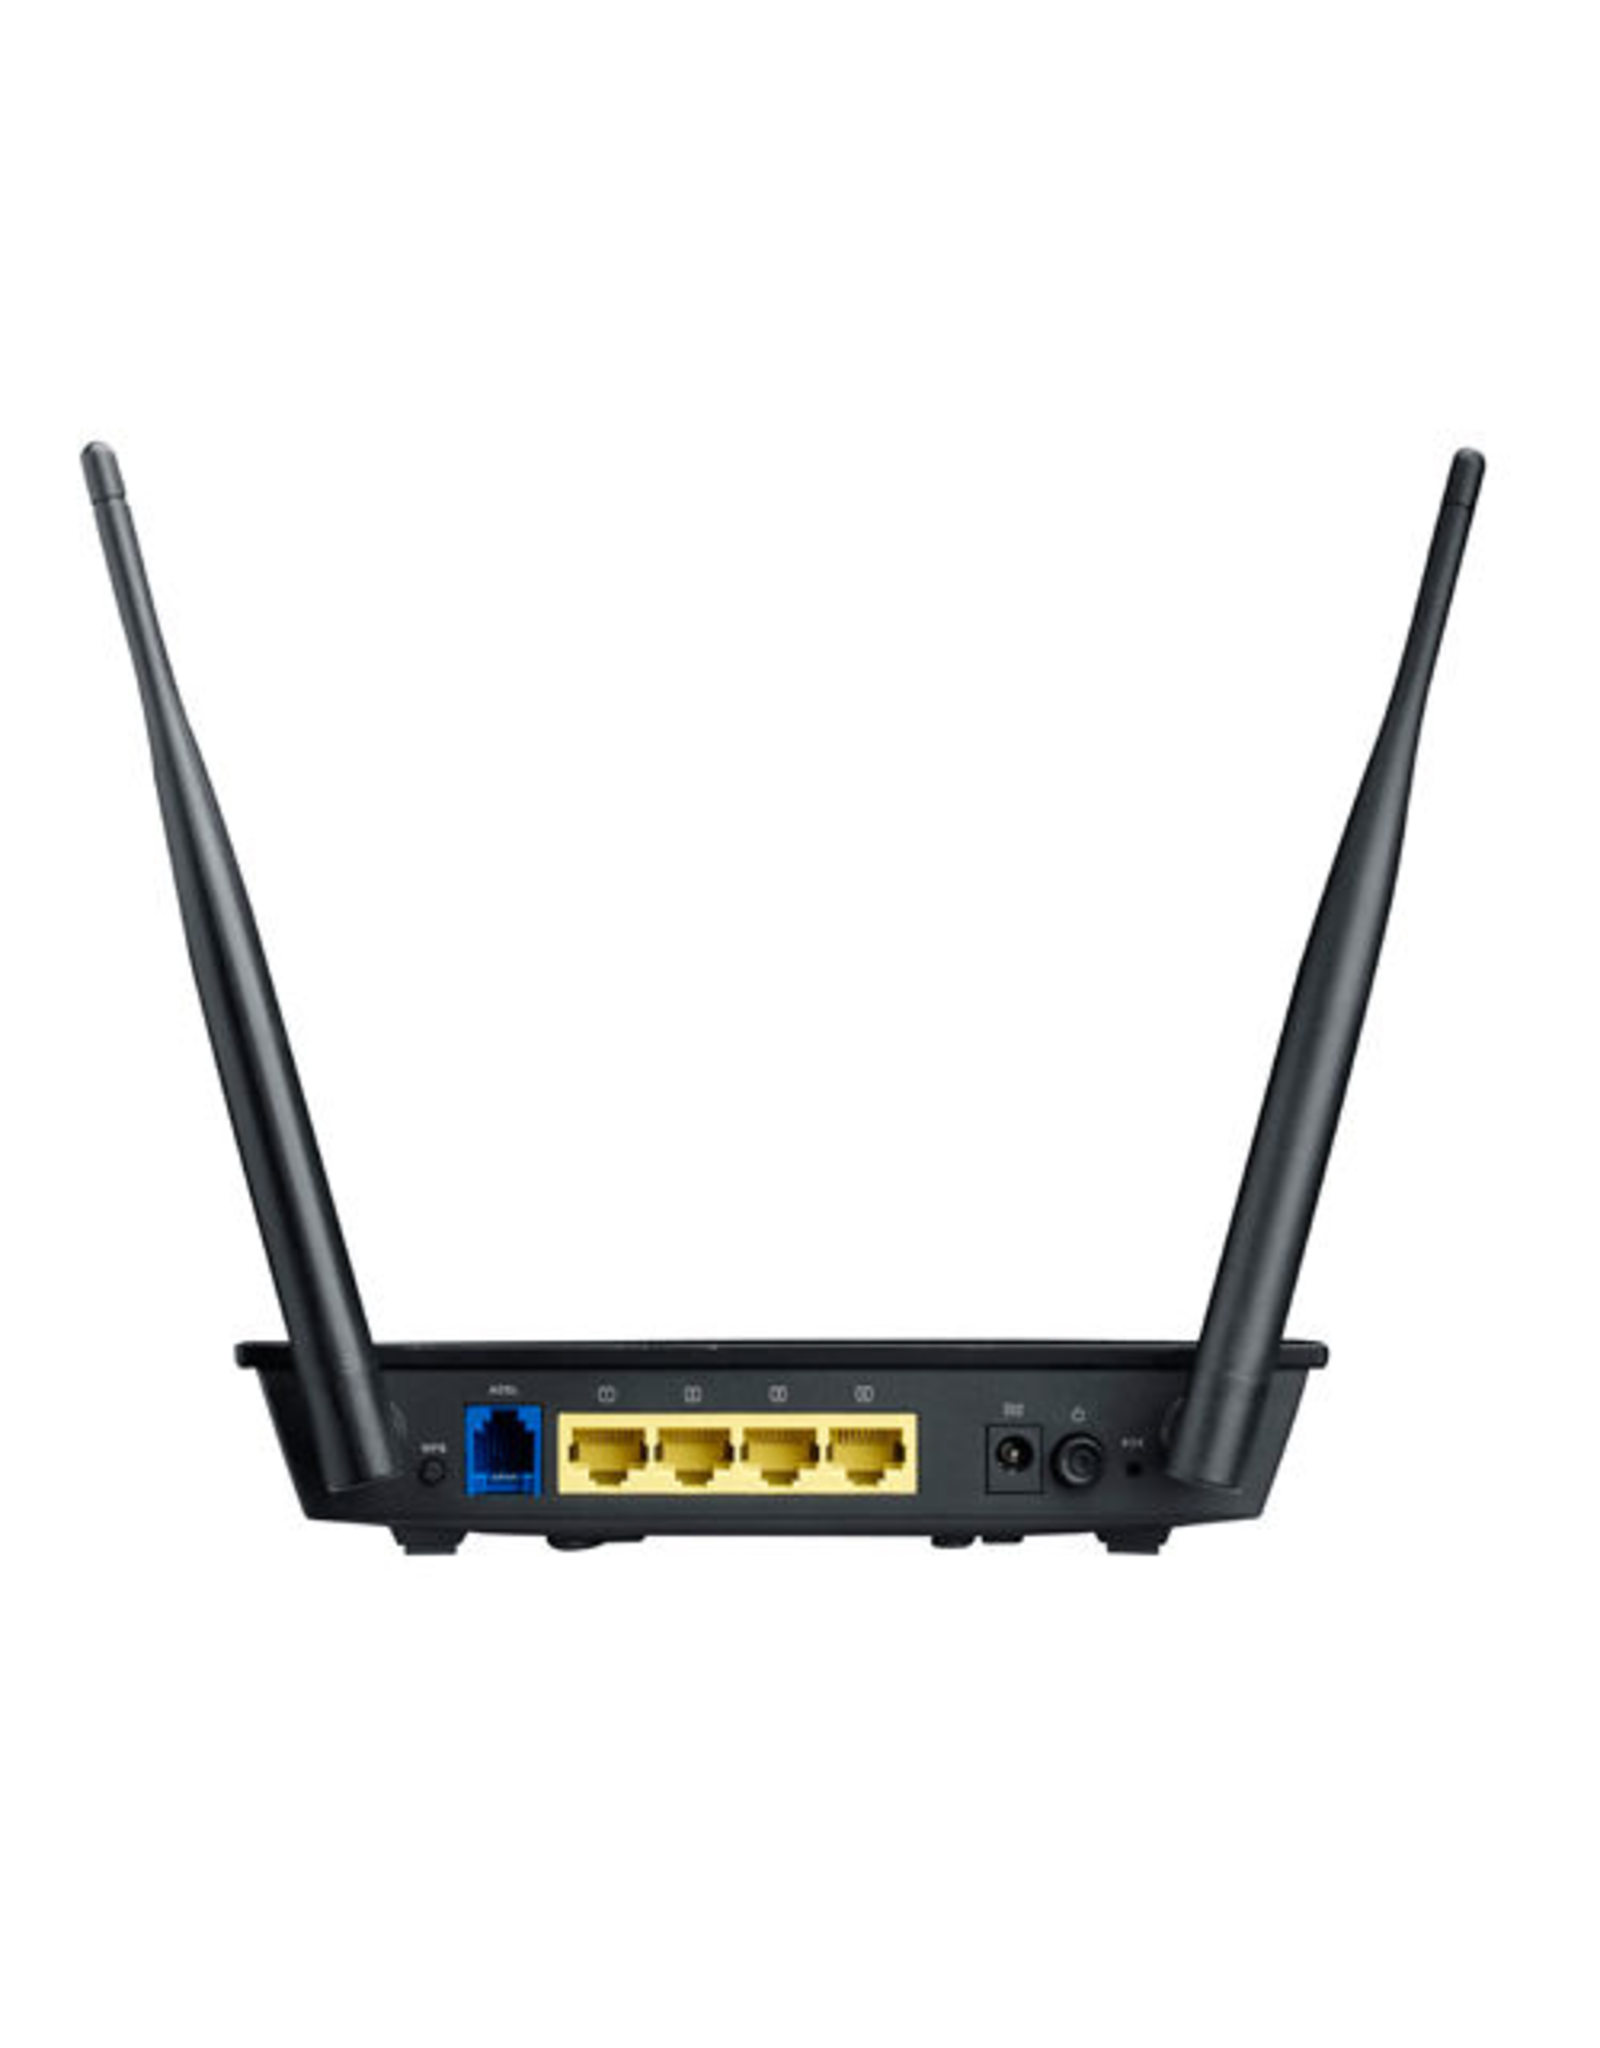 Asus Asus Wireless-N 300 2.4GHz ADSL Modem Router